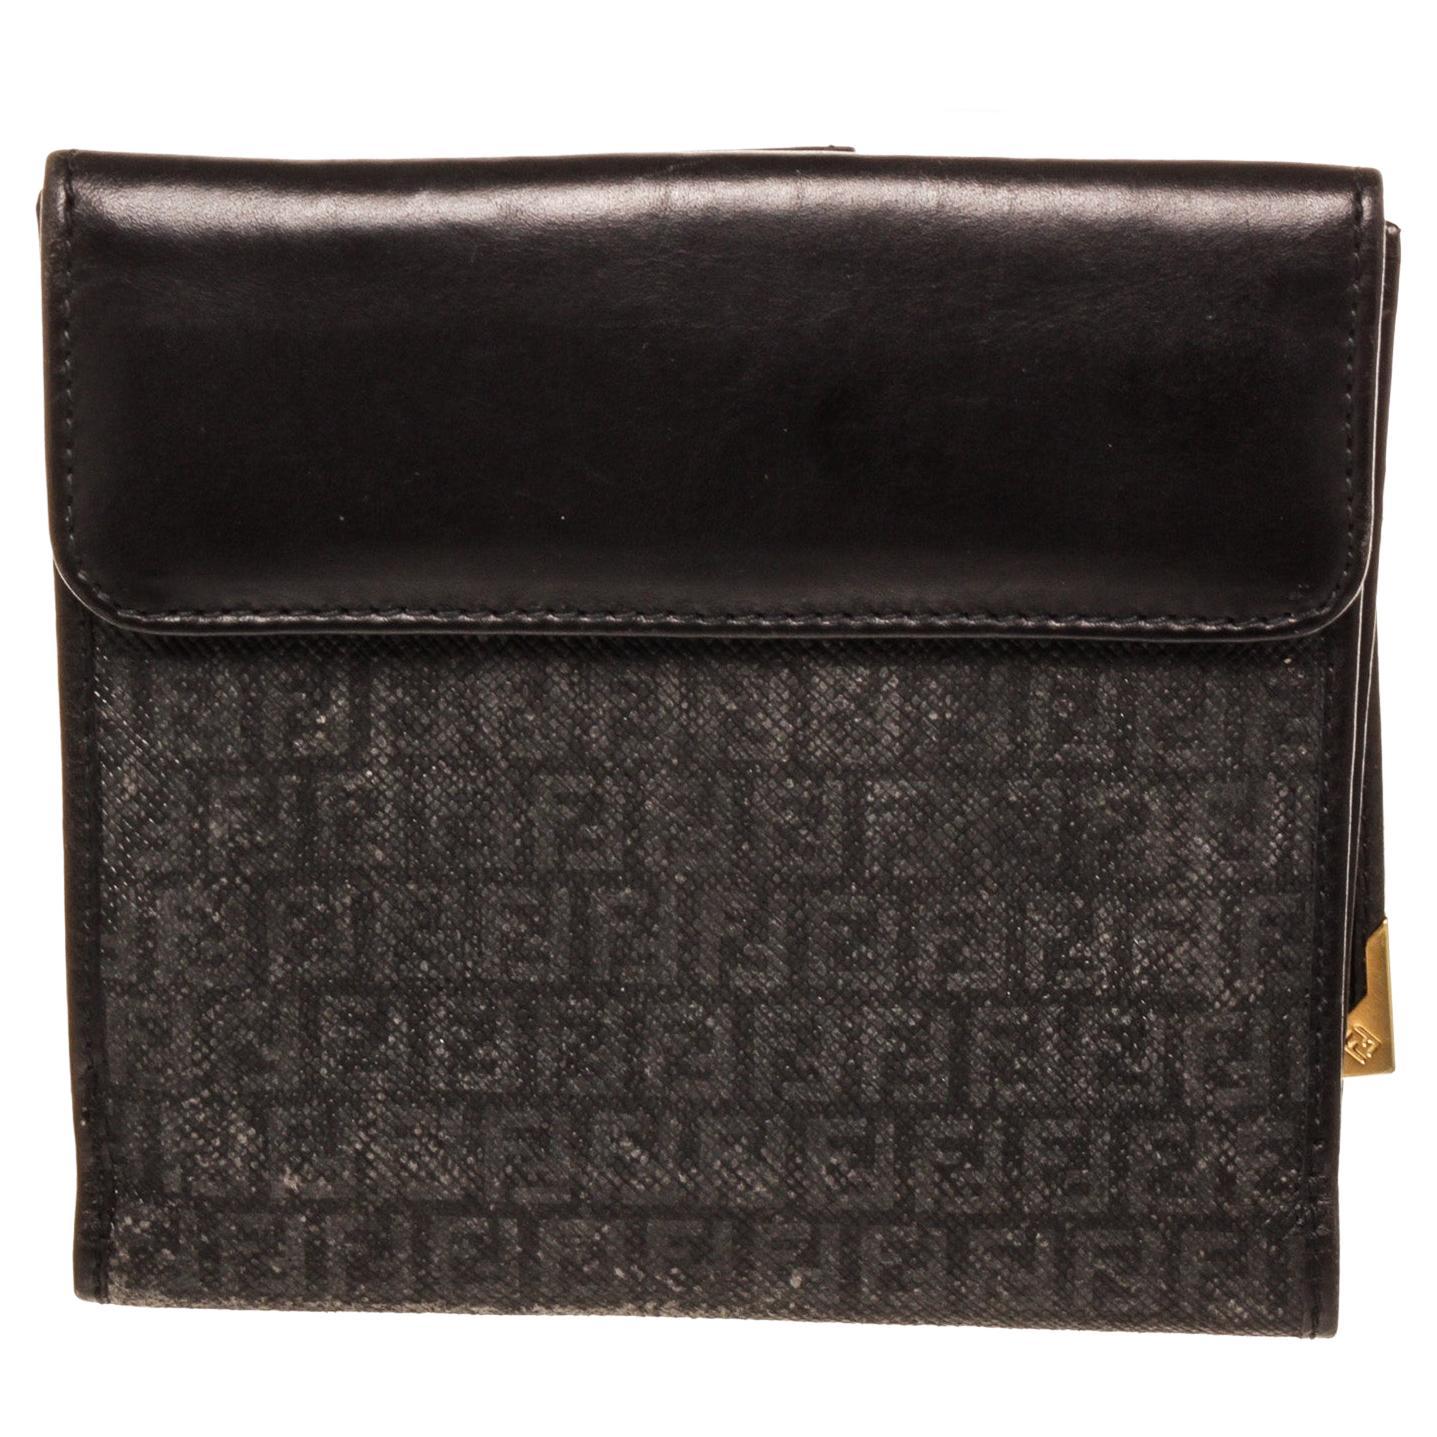 Fendi Black Canvas Compact Tab Wallet with canvas gold-tone hardware, interior  For Sale